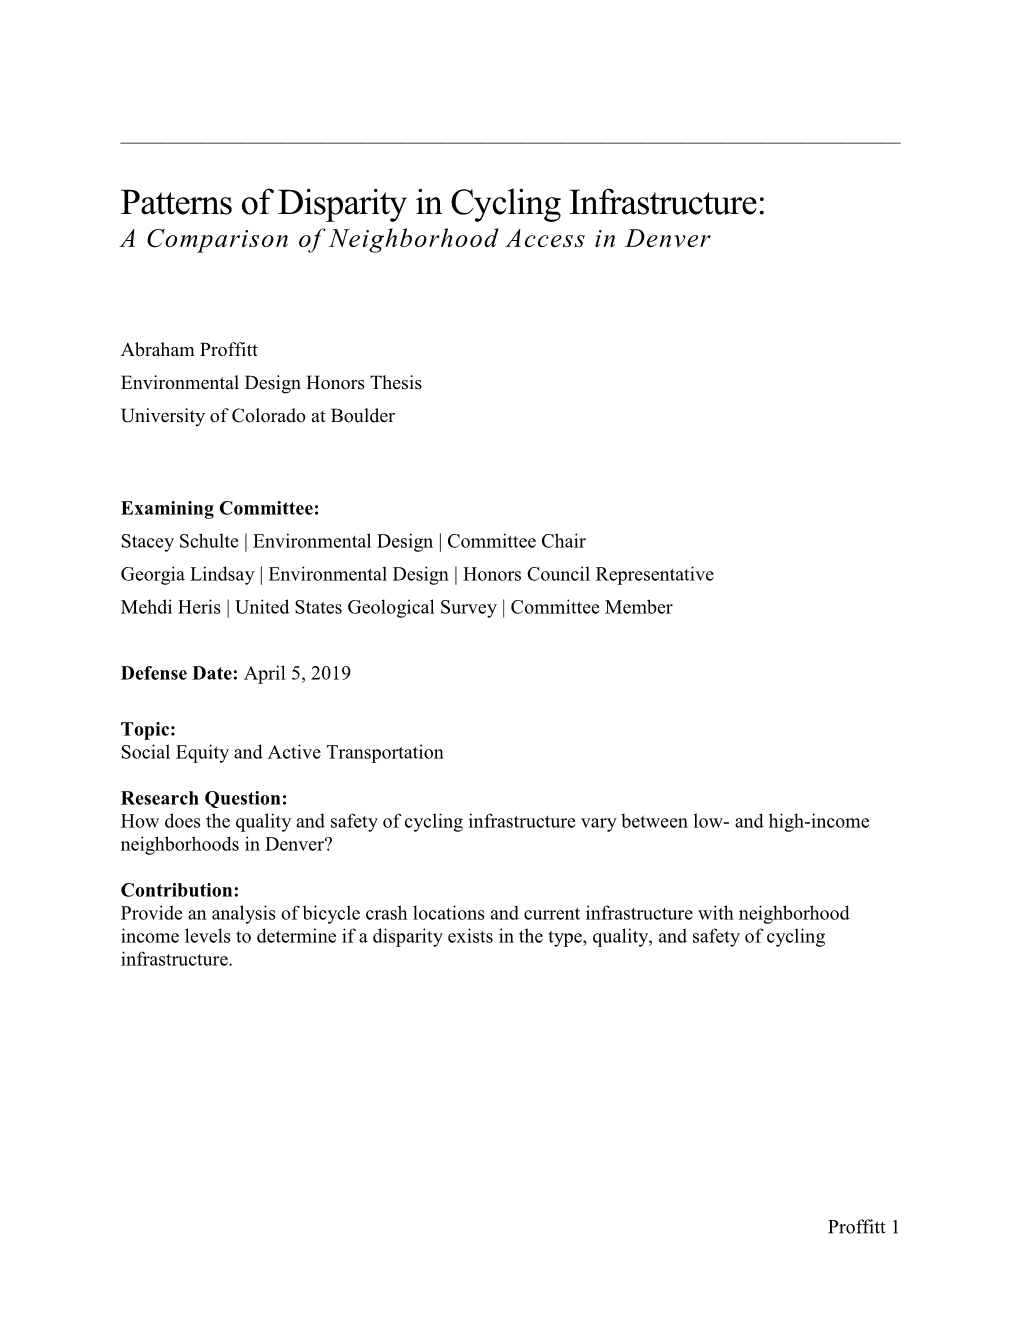 Patterns of Disparity in Cycling Infrastructure: a Comparison of Neighborhood Access in Denver